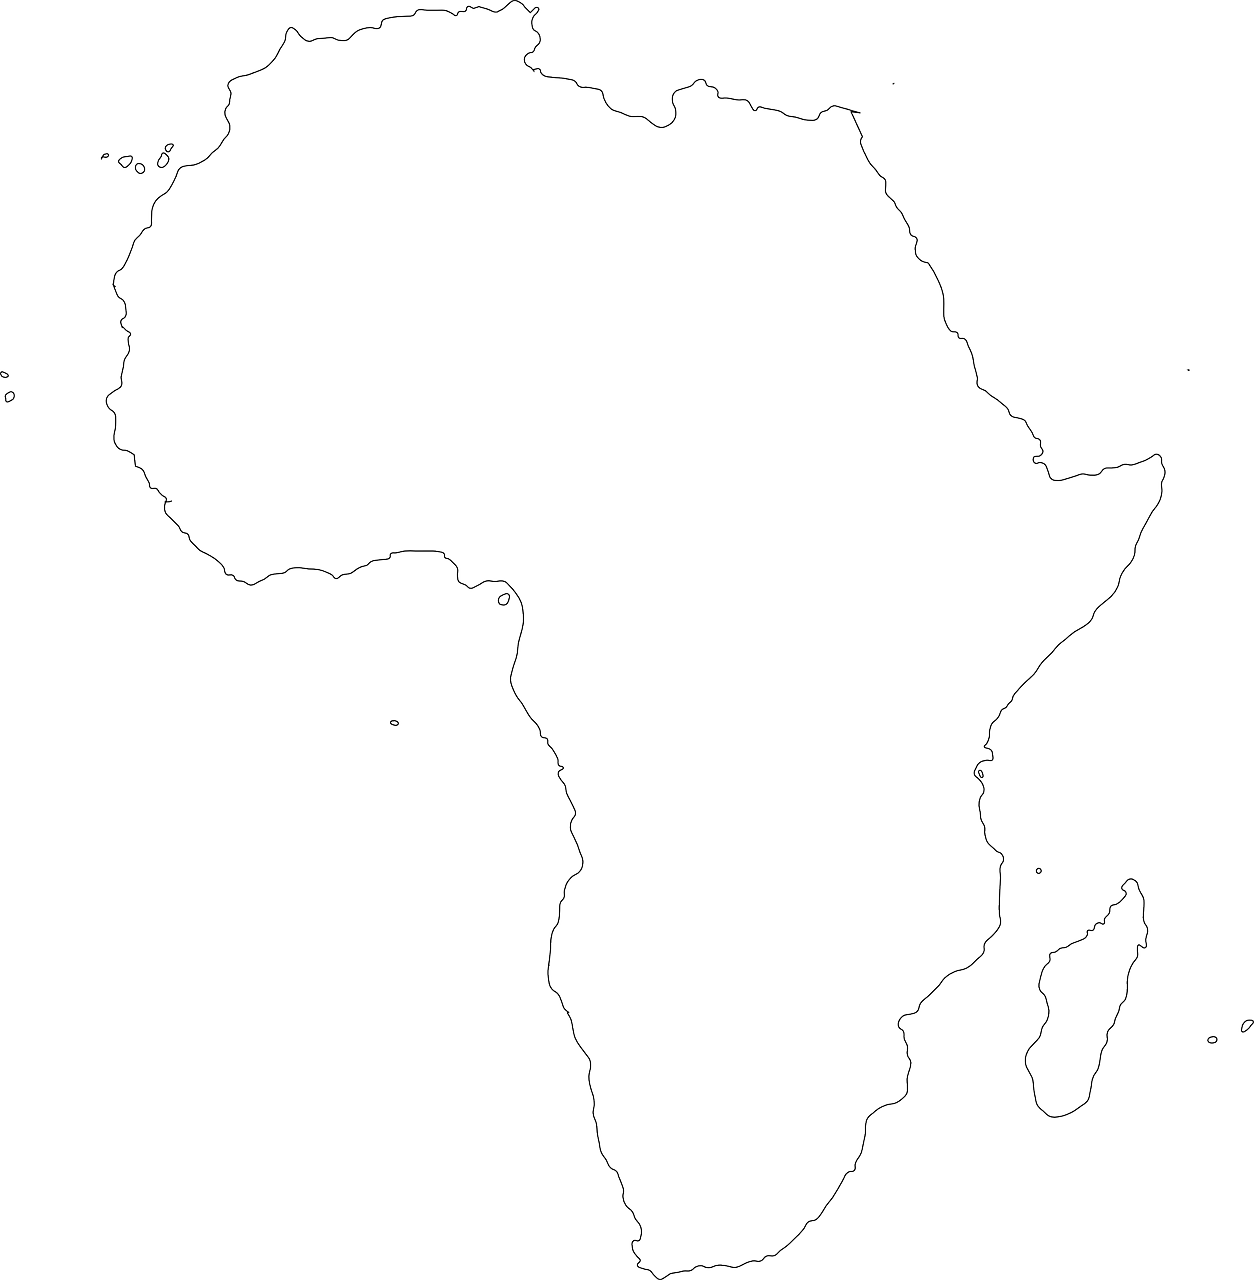 a black and white map of africa, white outline border, line drawn, giant, beginner